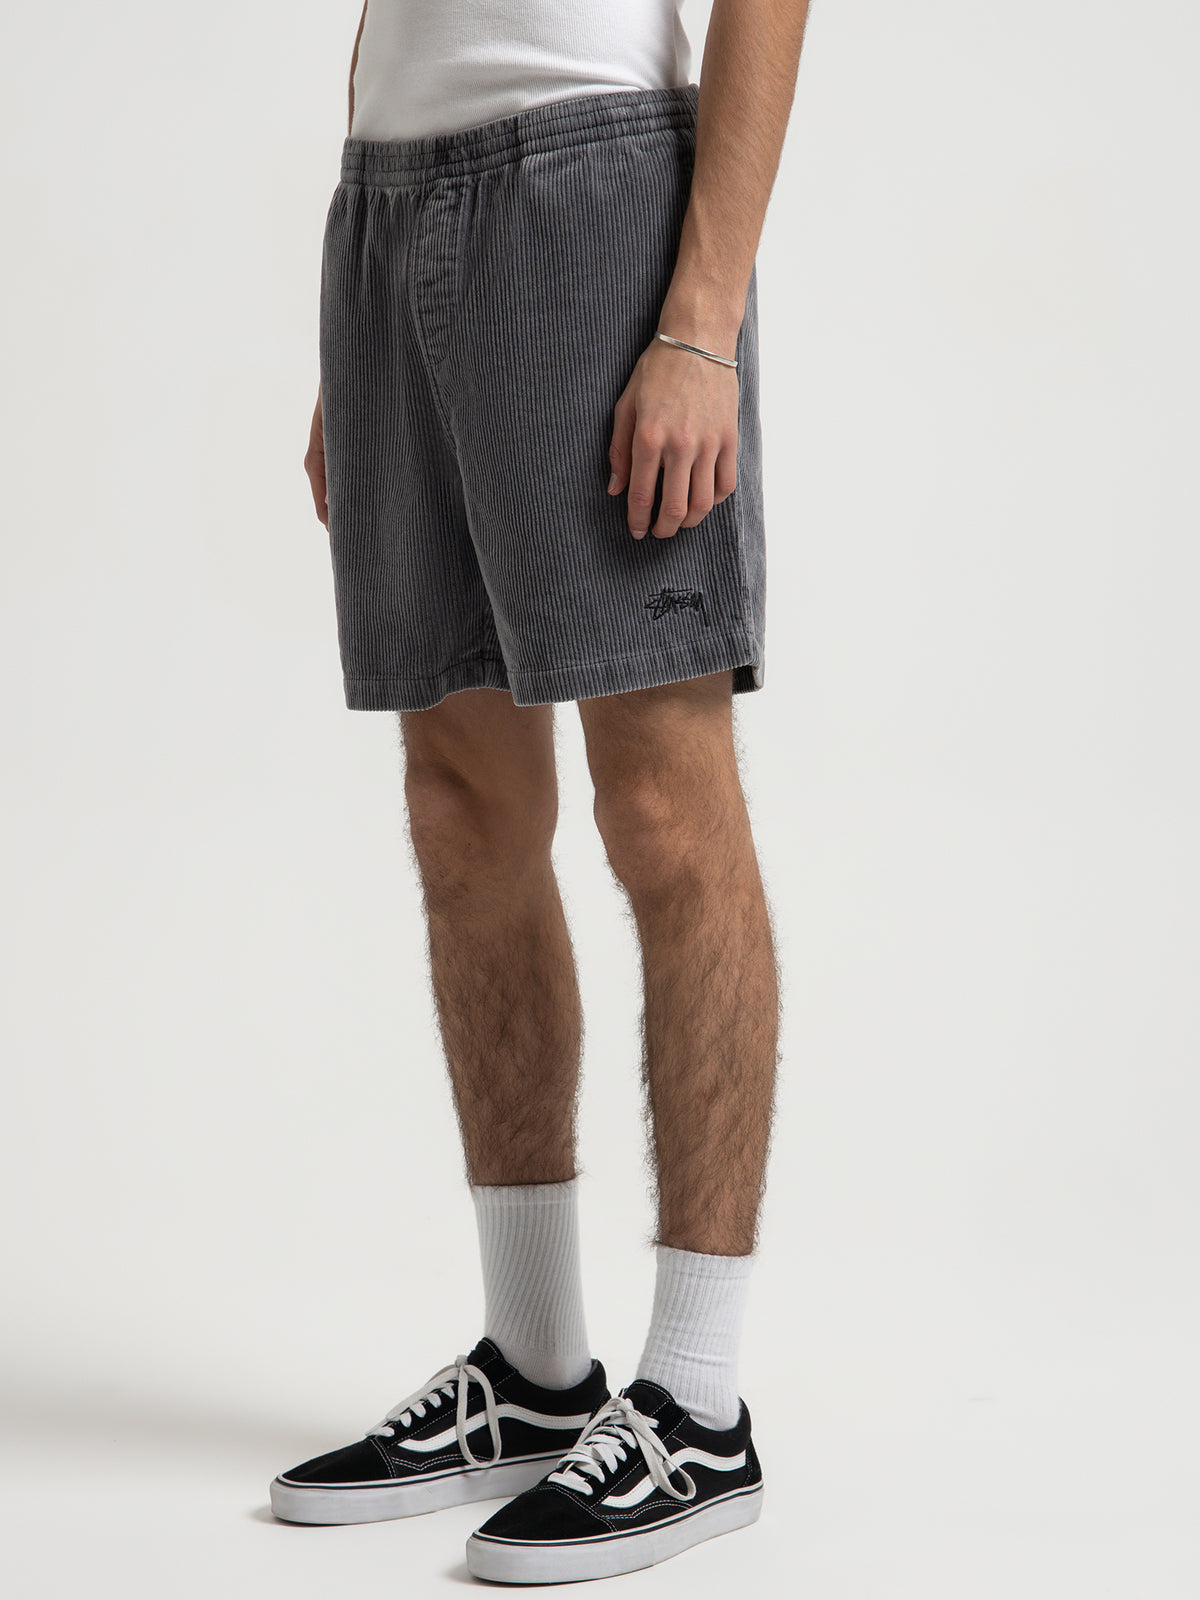 Wide Wale Cord Shorts in Charcoal